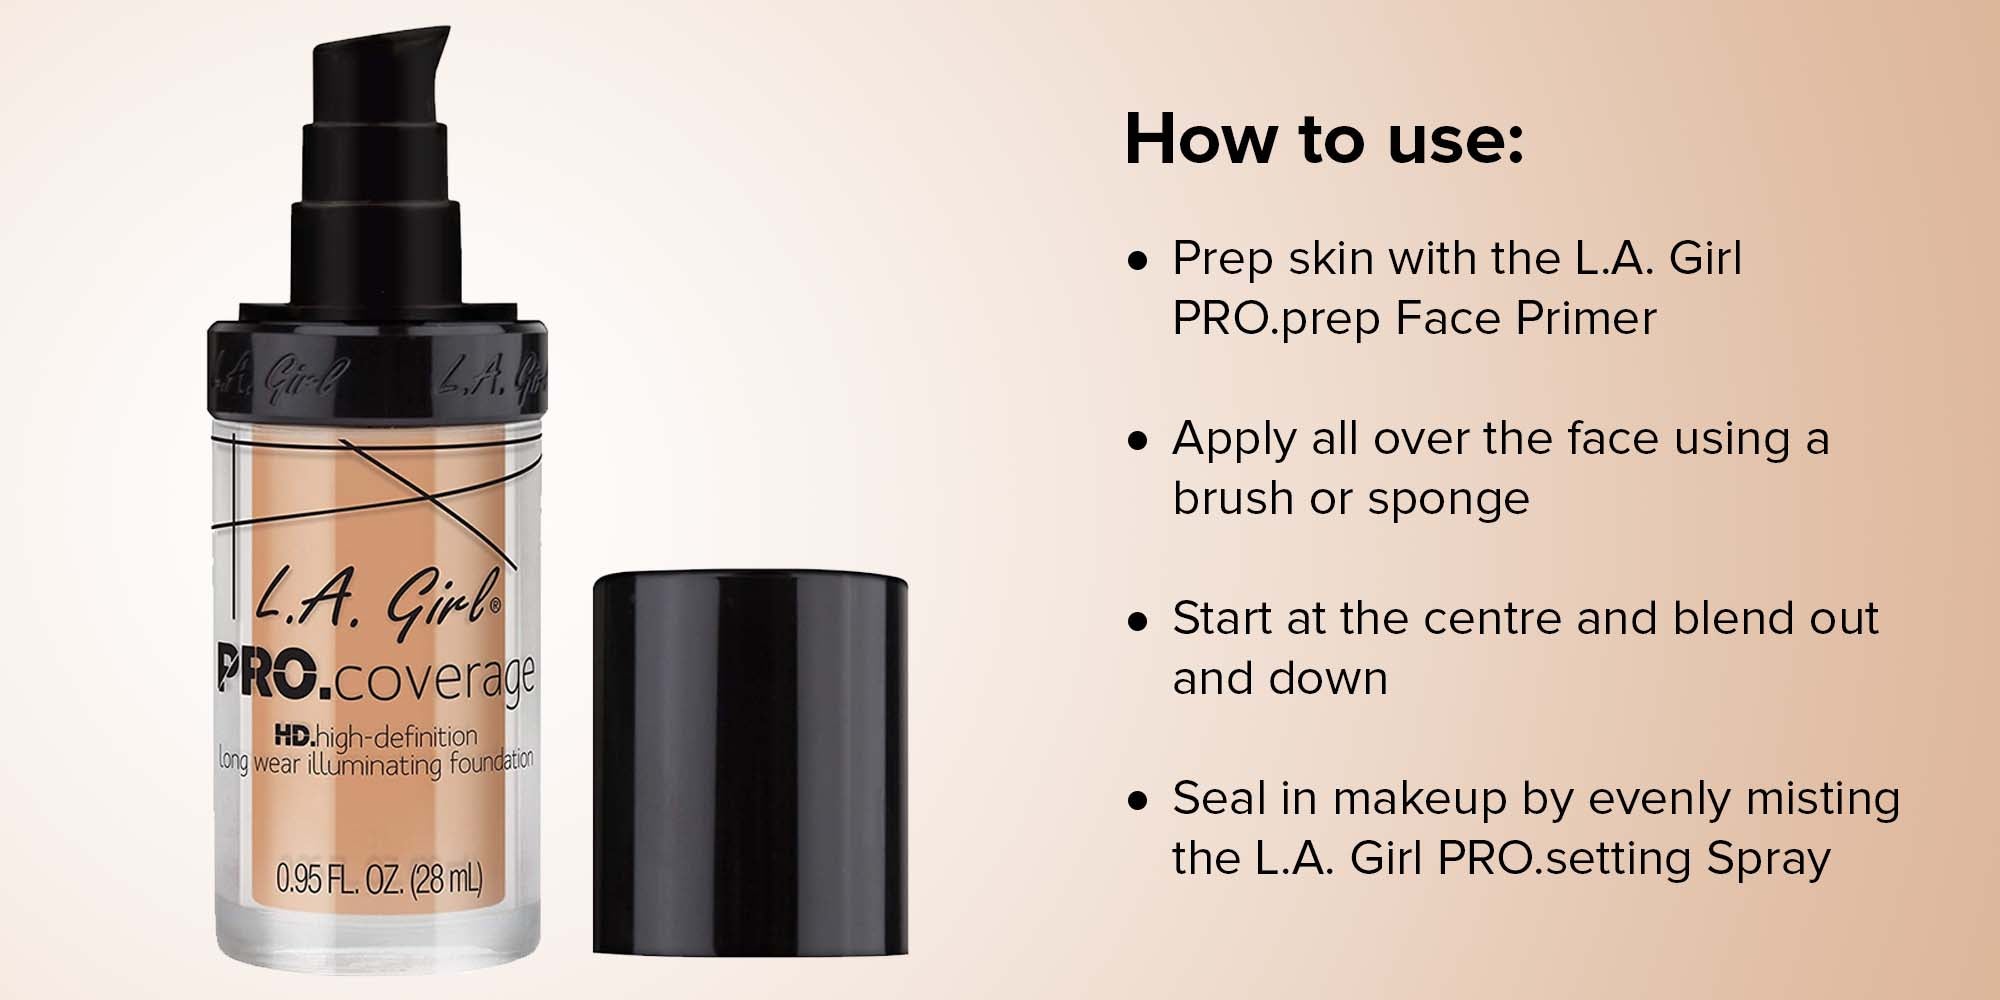 L.A. Girl PRO.coverage HD High-Definition Long Wear Illuminating